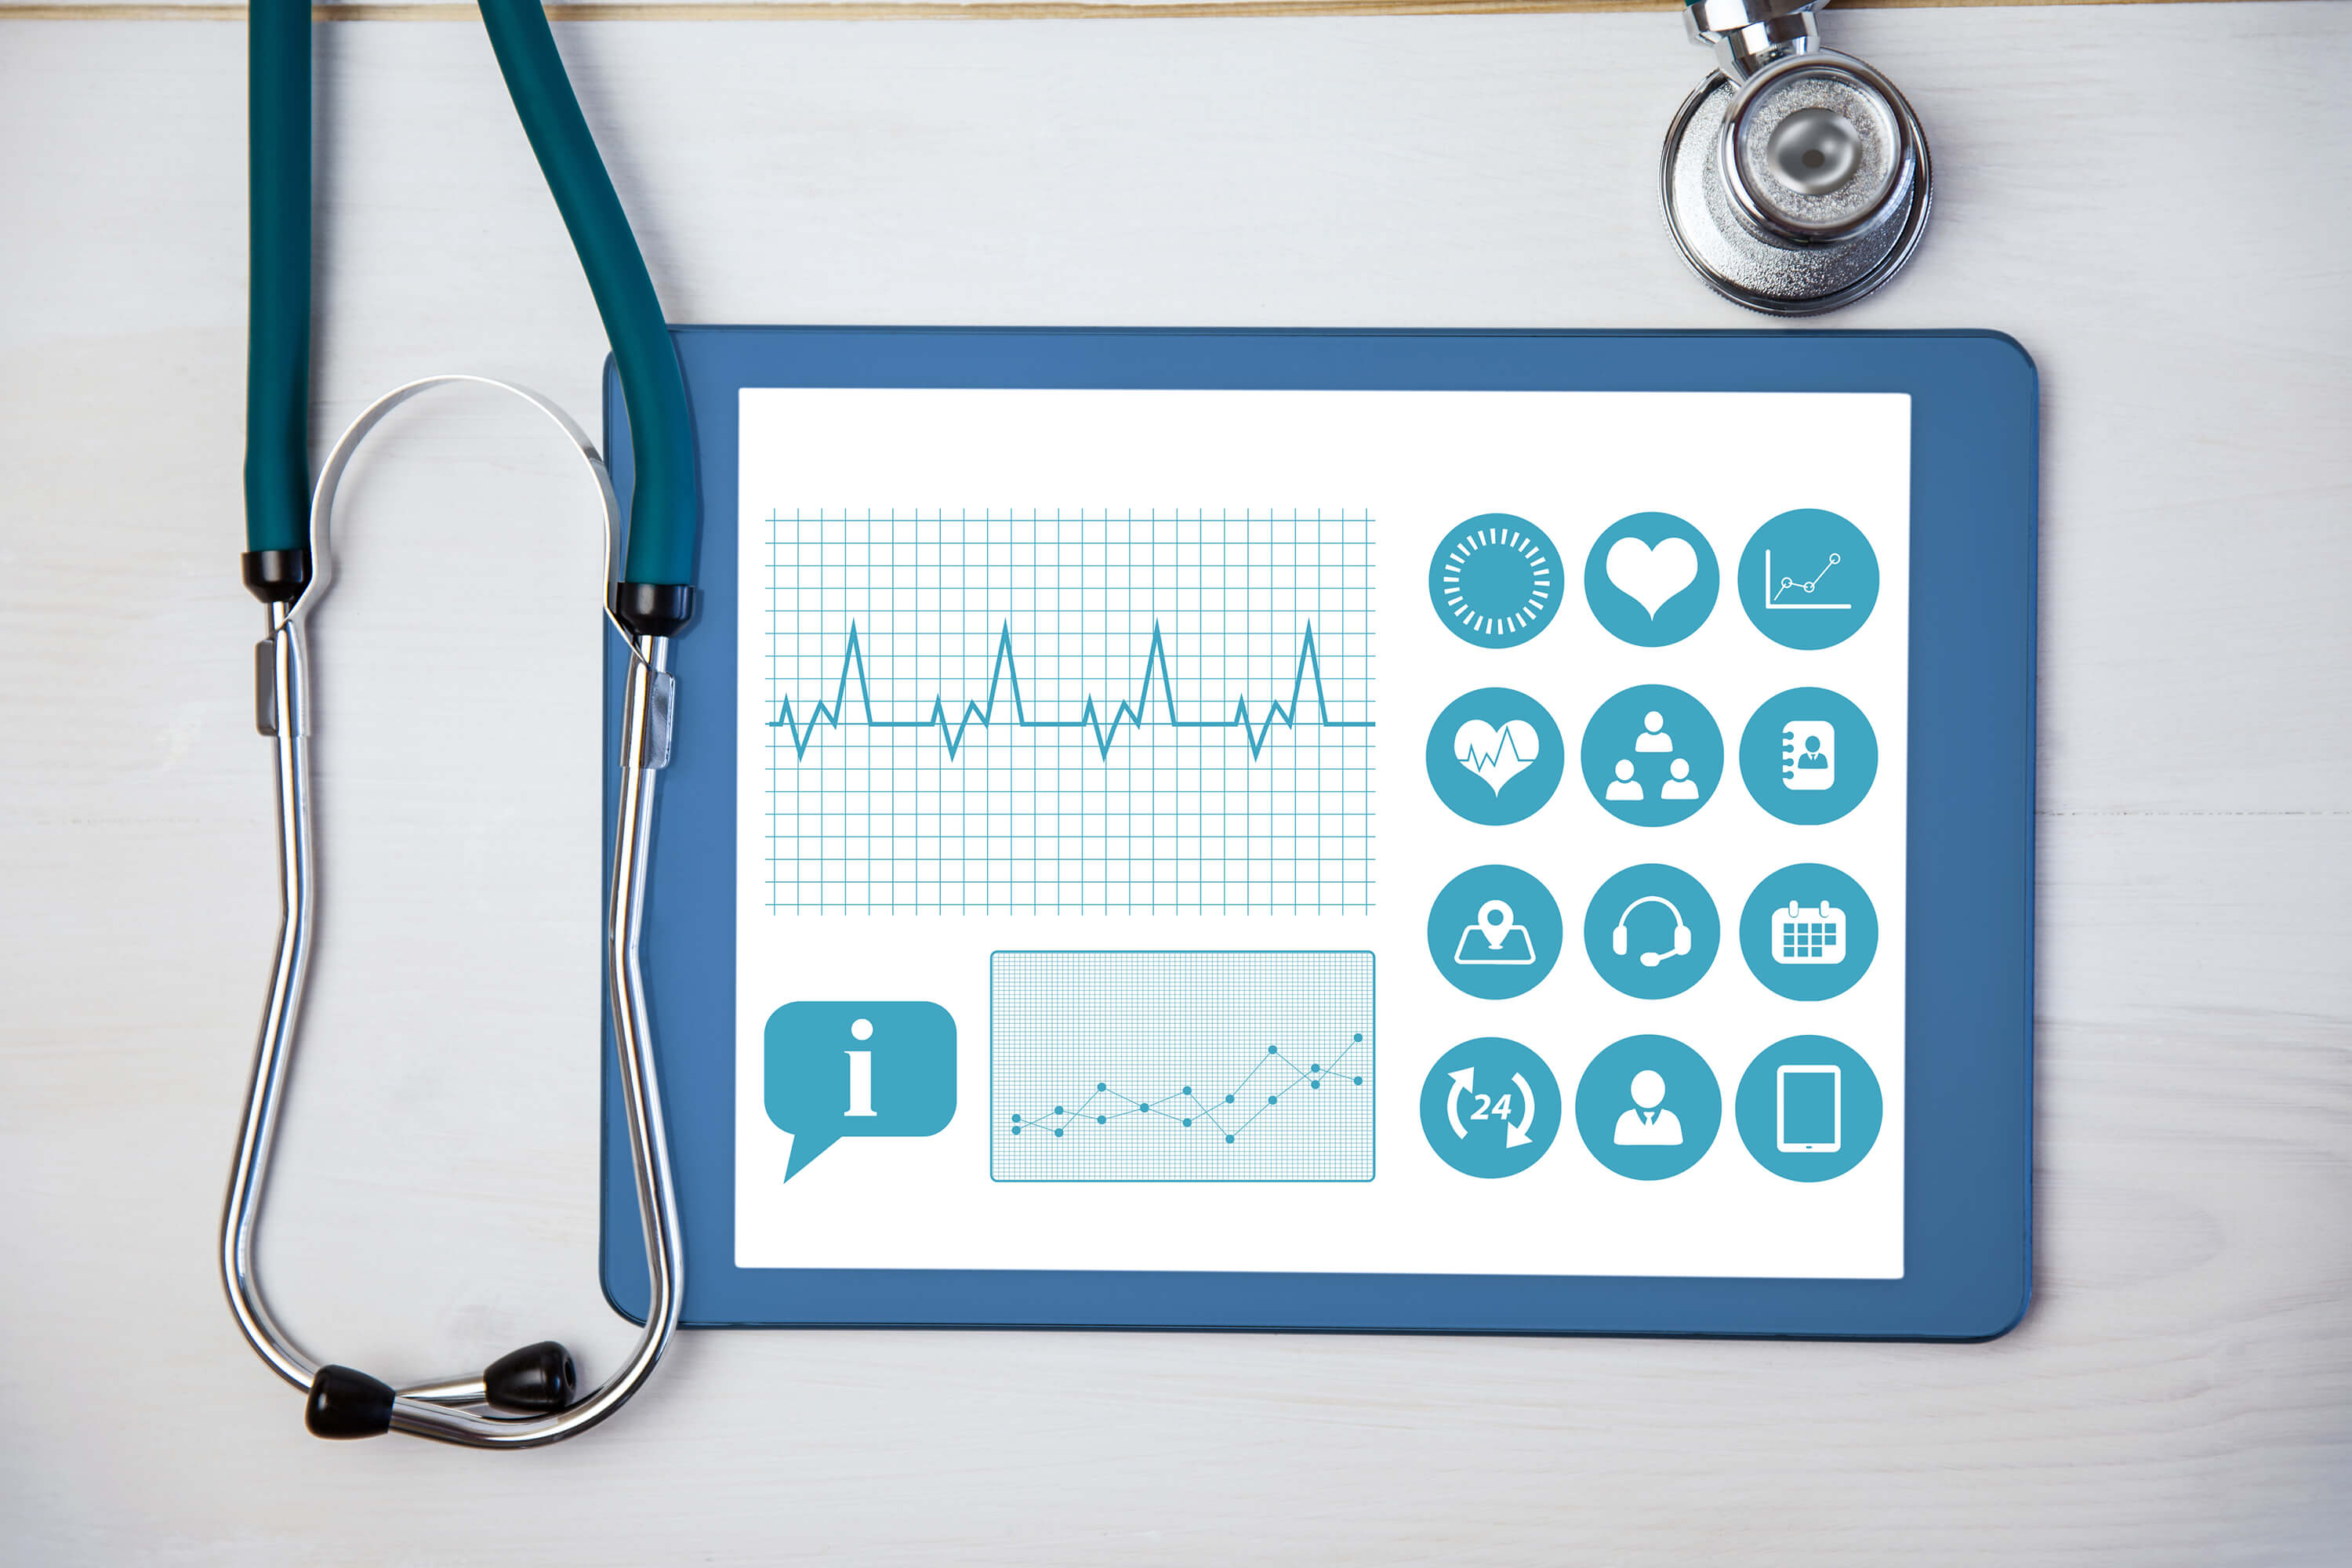 IoT solutions in healthcare